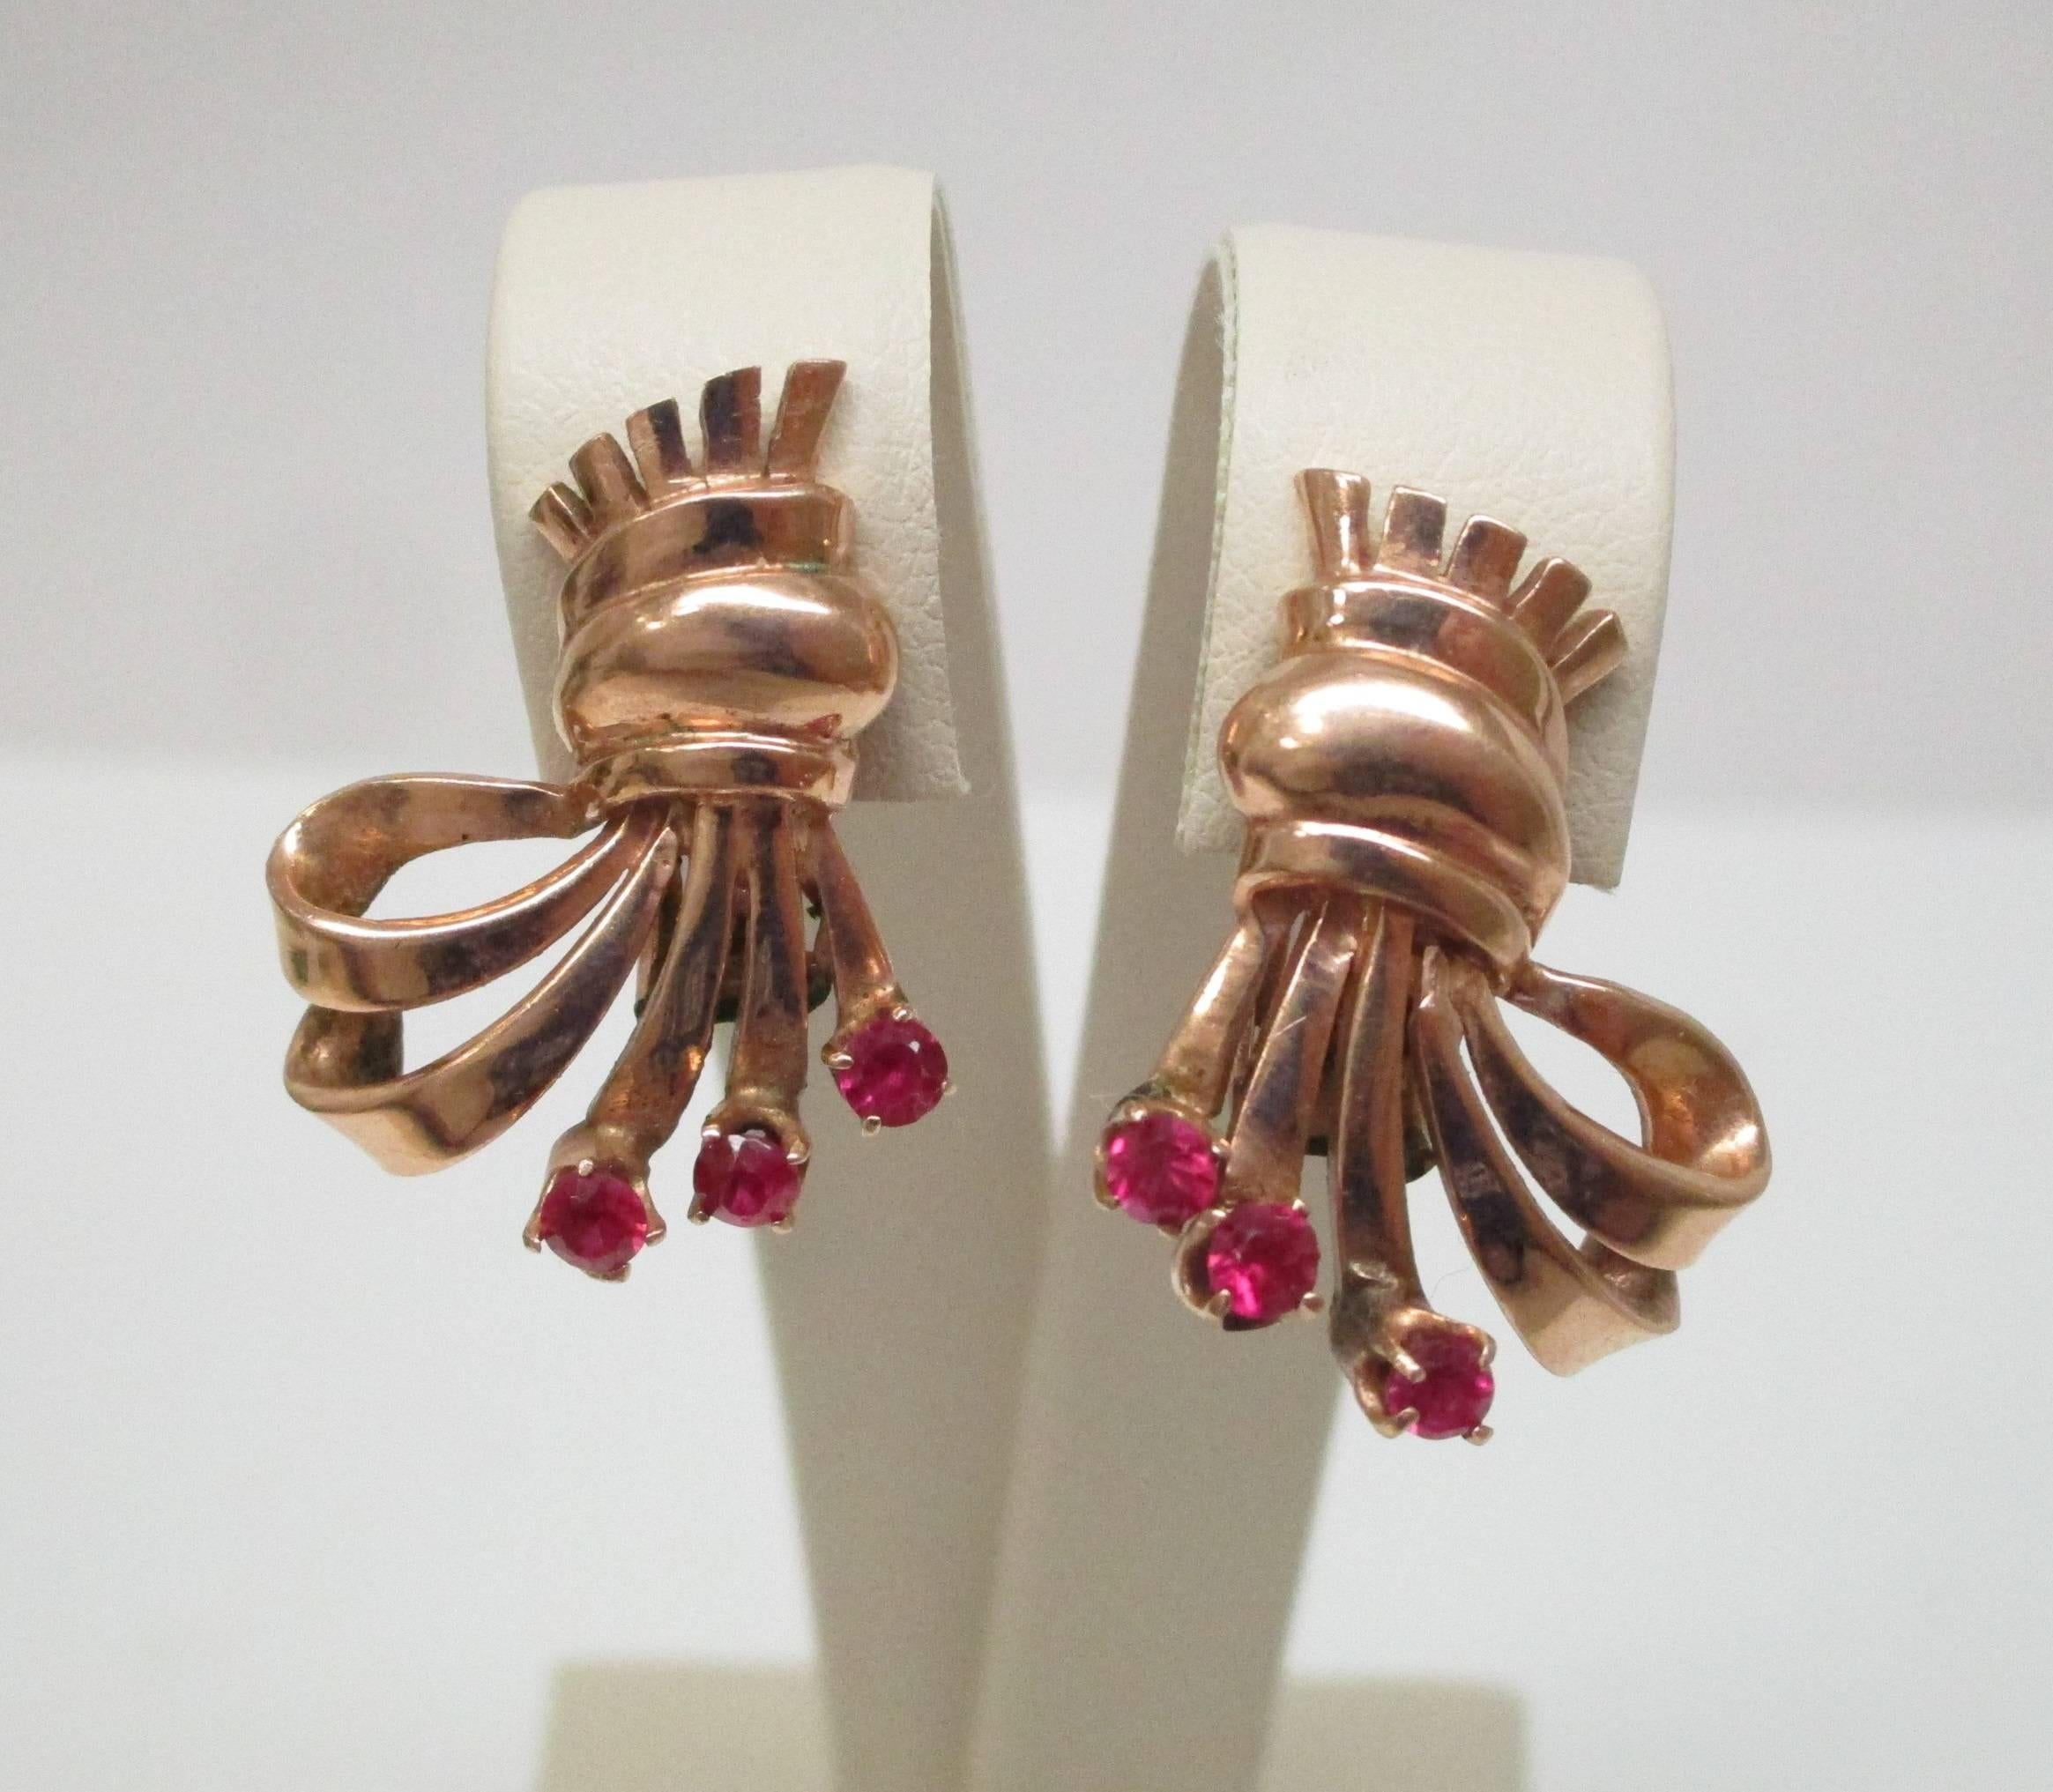 A spray of bright and lively Rubies, gracing rose gold ribbons. These delightful earrings will fast become an everyday favorite. With clip backs, you will be able to just pop these on whenever you get the notion. Super fun and beautiful, you can